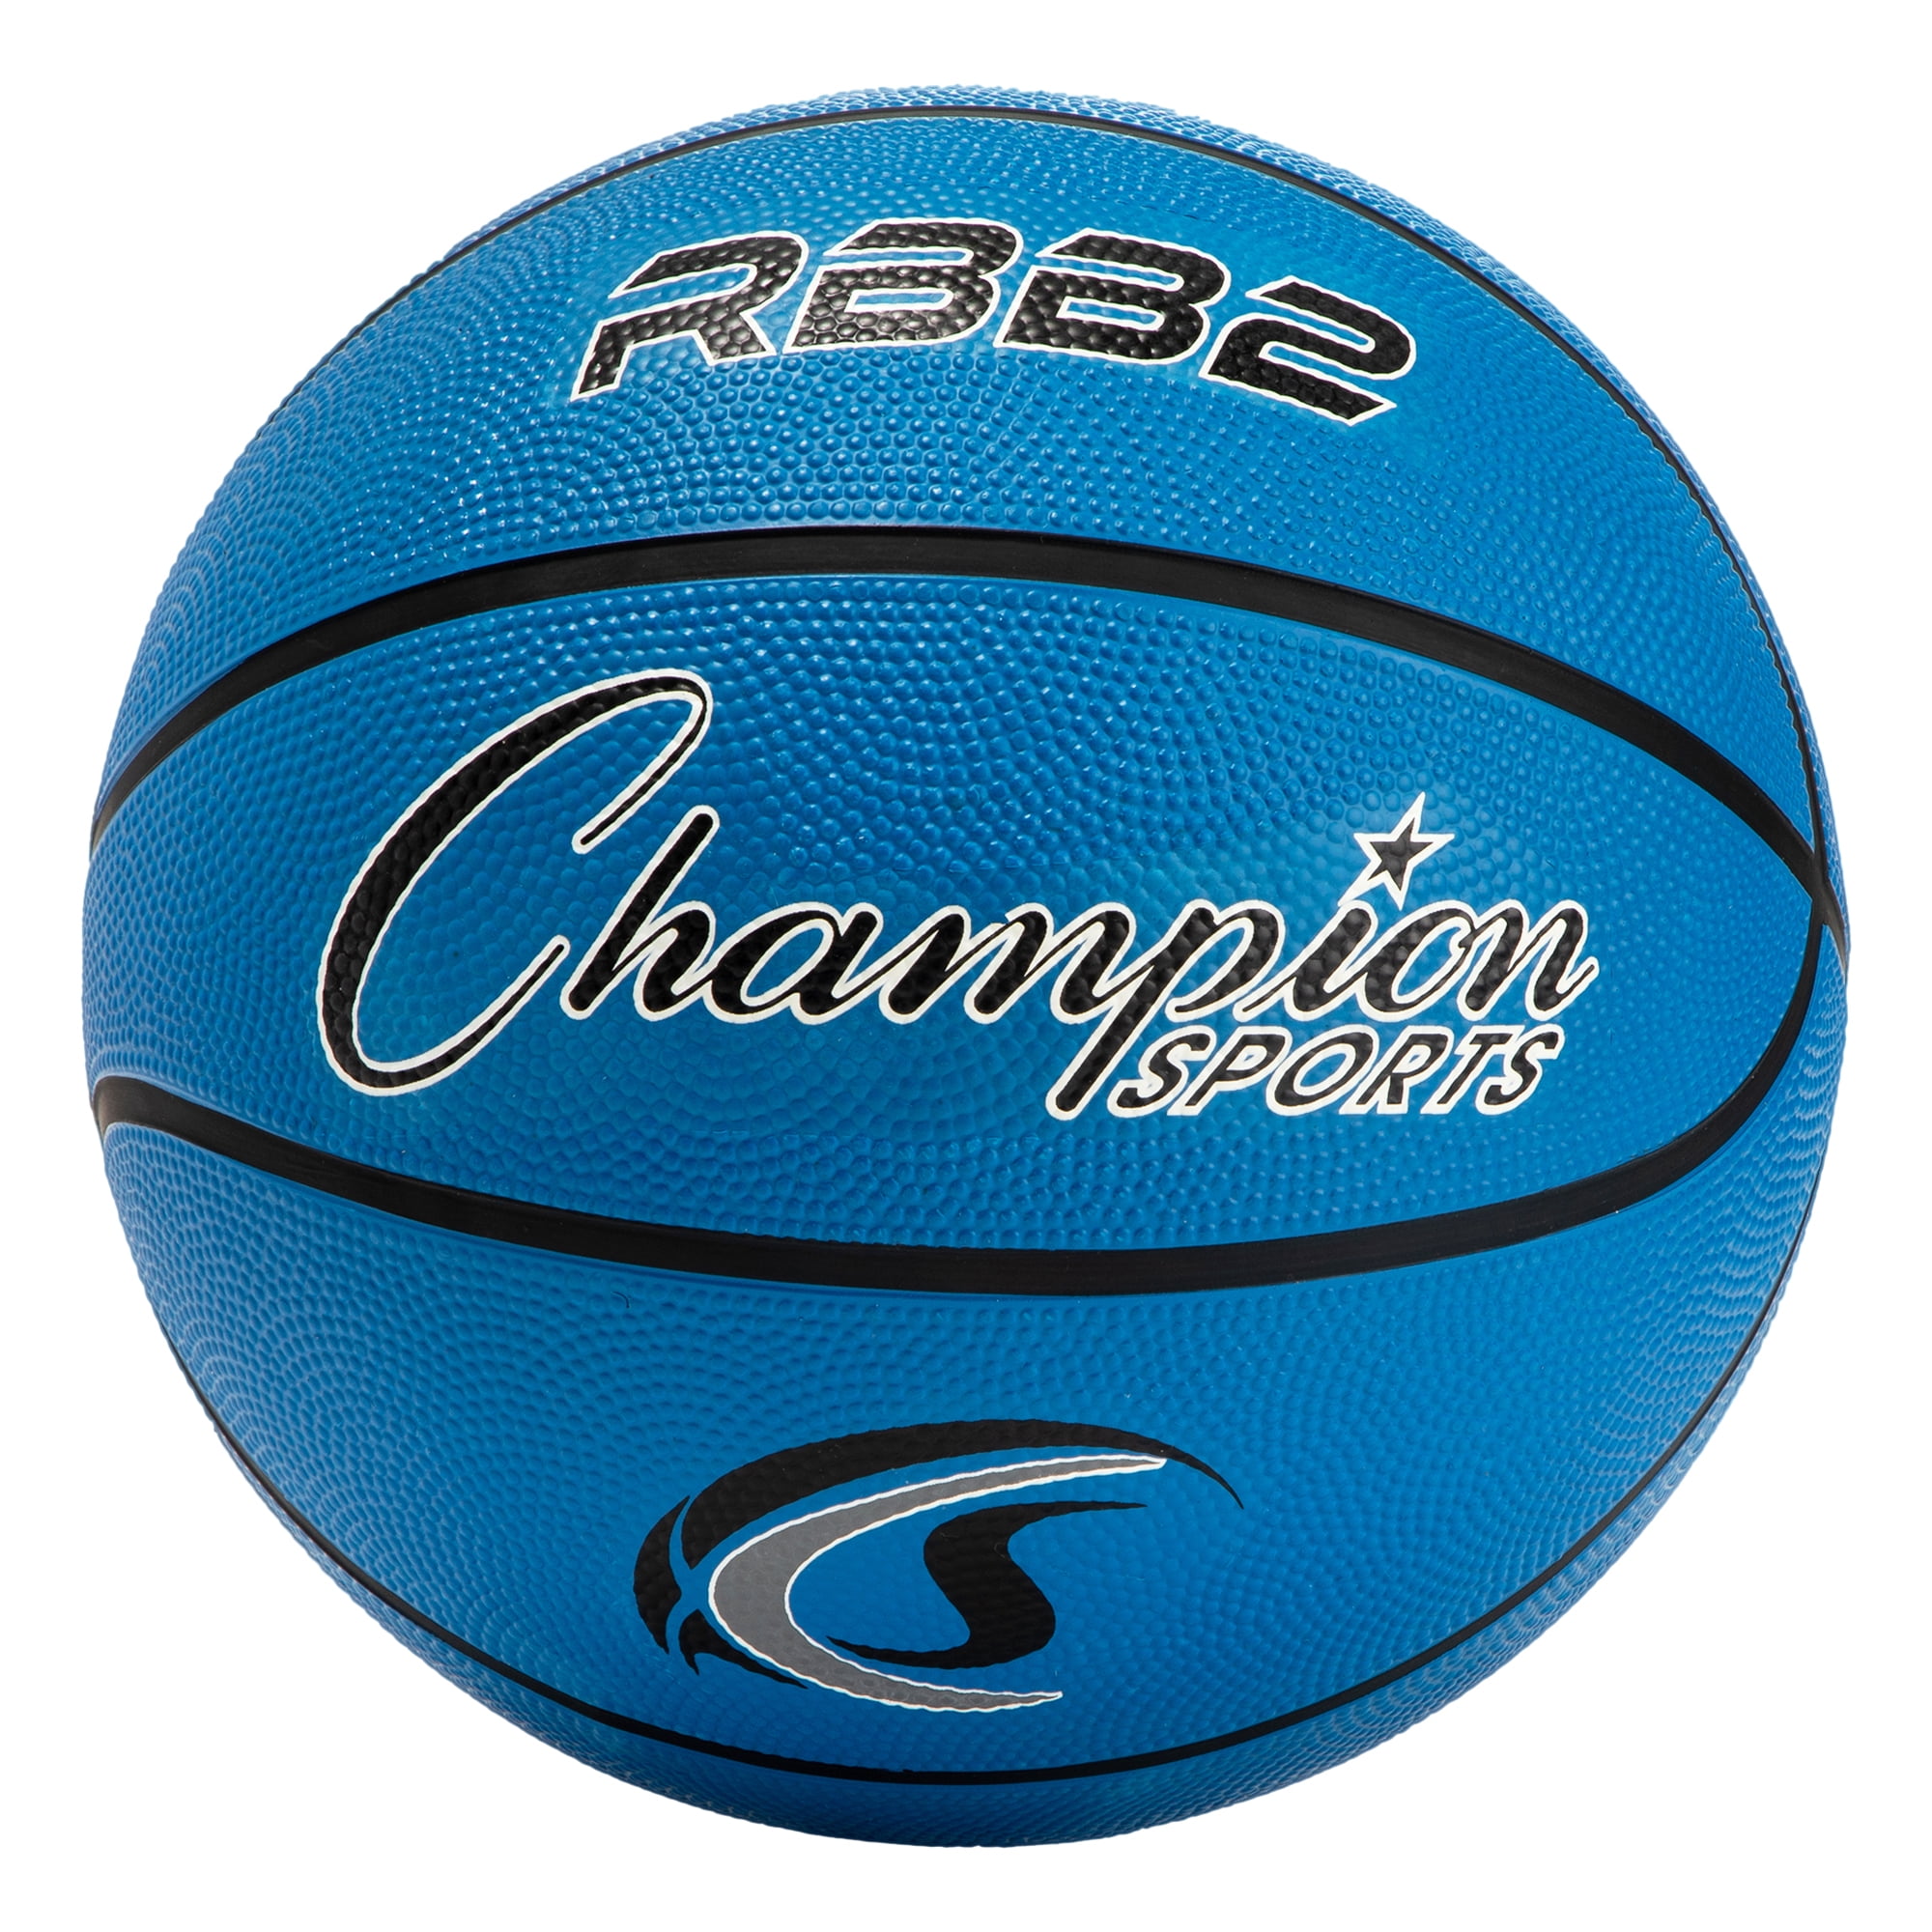 Picture of Champion Sports RBB2BL 27.5 in. Pro Rubber Basketball, Royal Blue